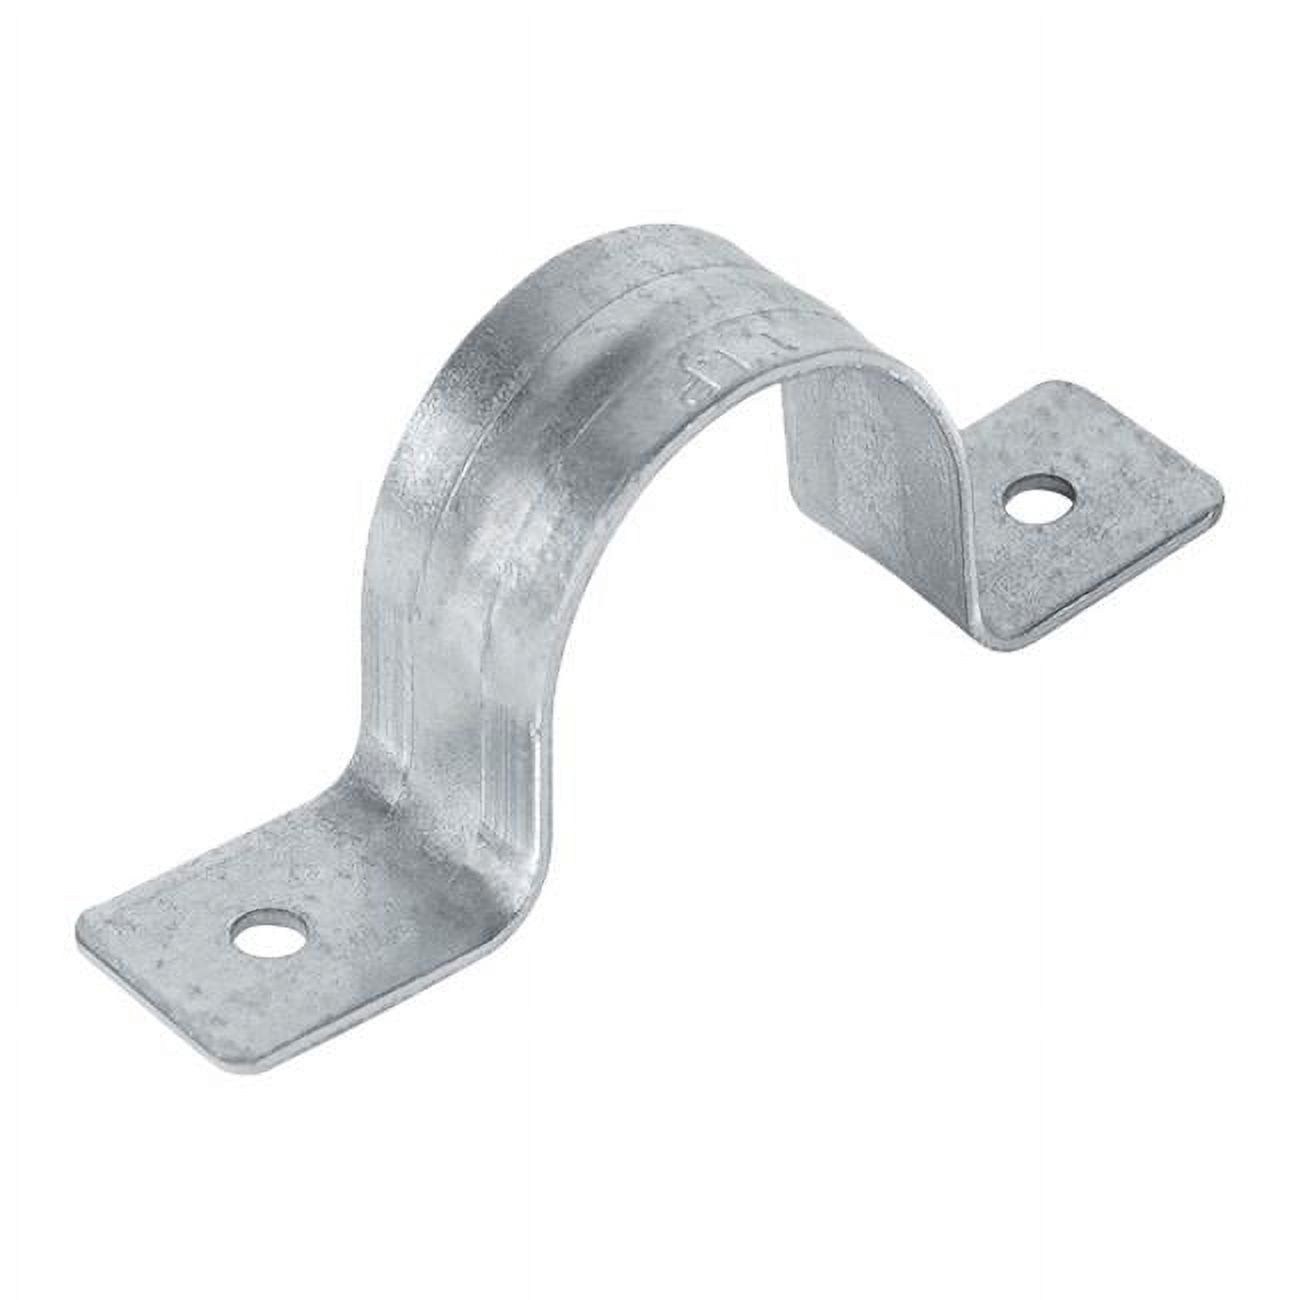 4902318 1 In. Carbon Steel Pipe Strap - Galvanized, Pack Of 5